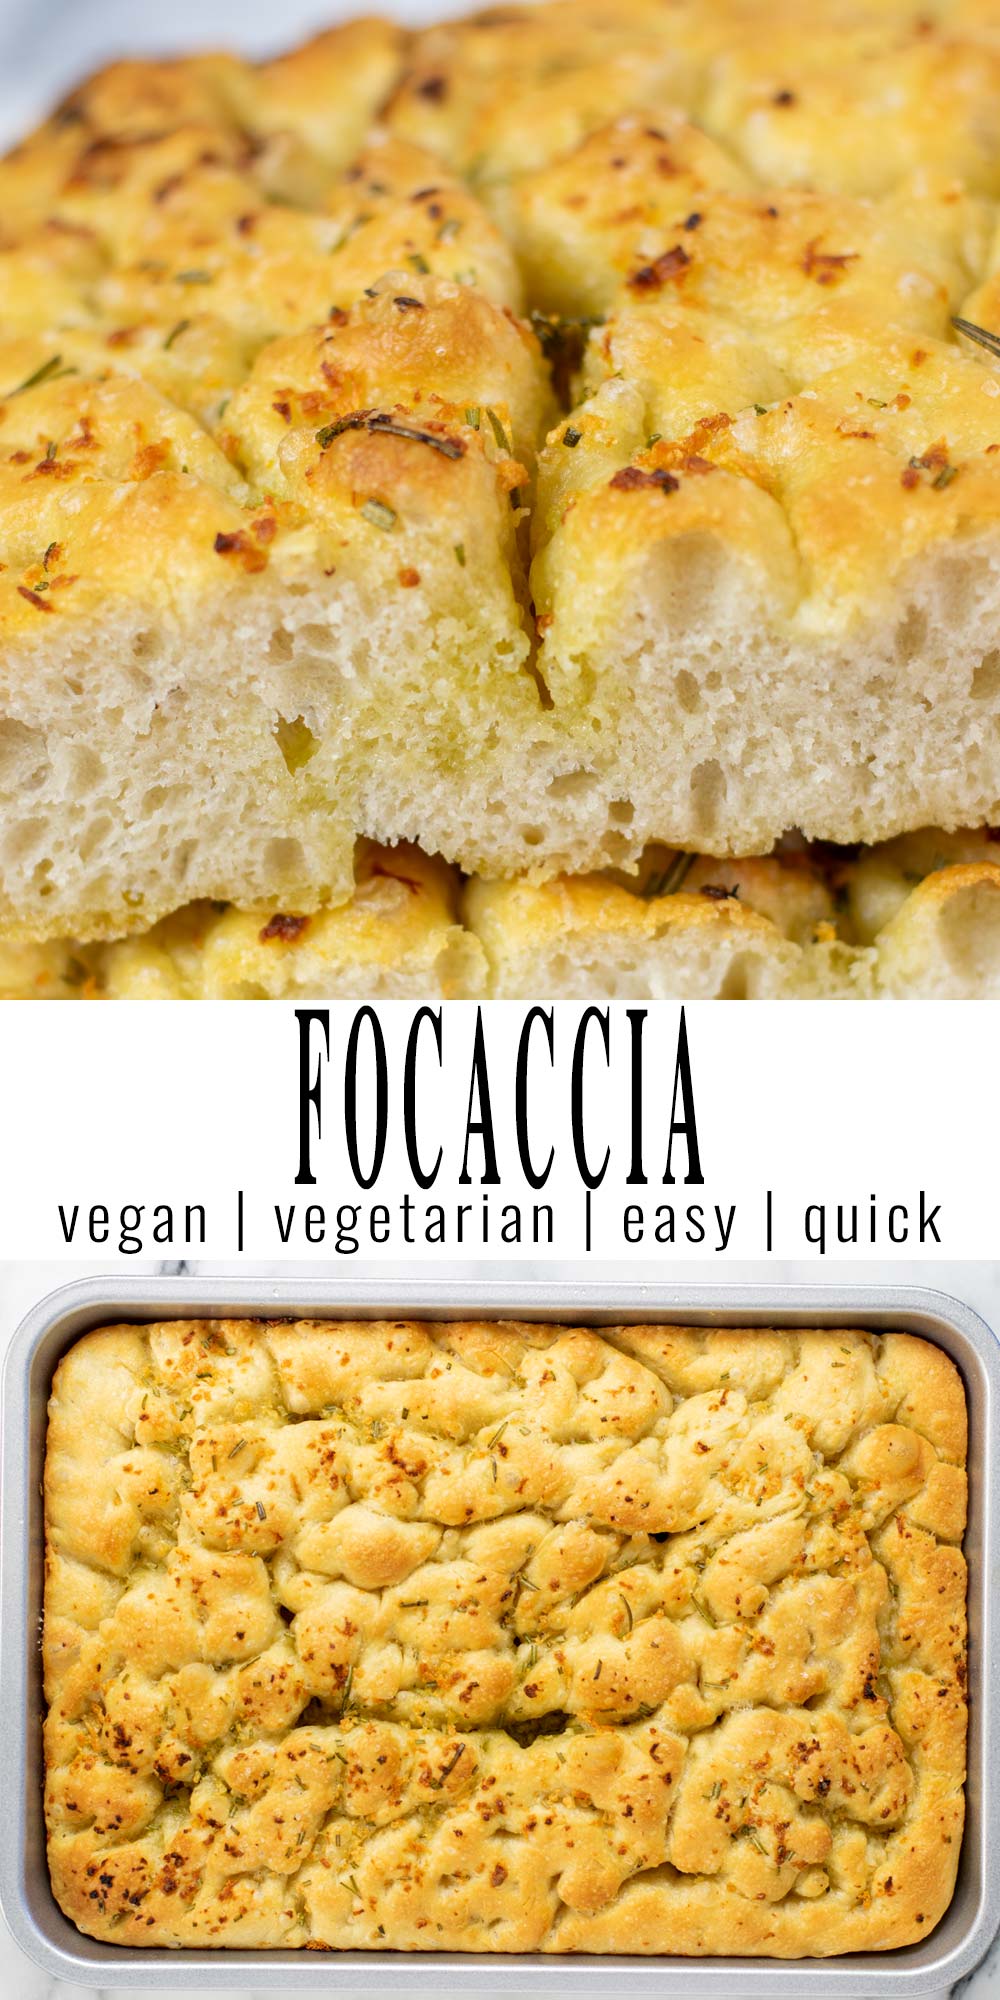 Collage of two pictures of the Focaccia with recipe title text.